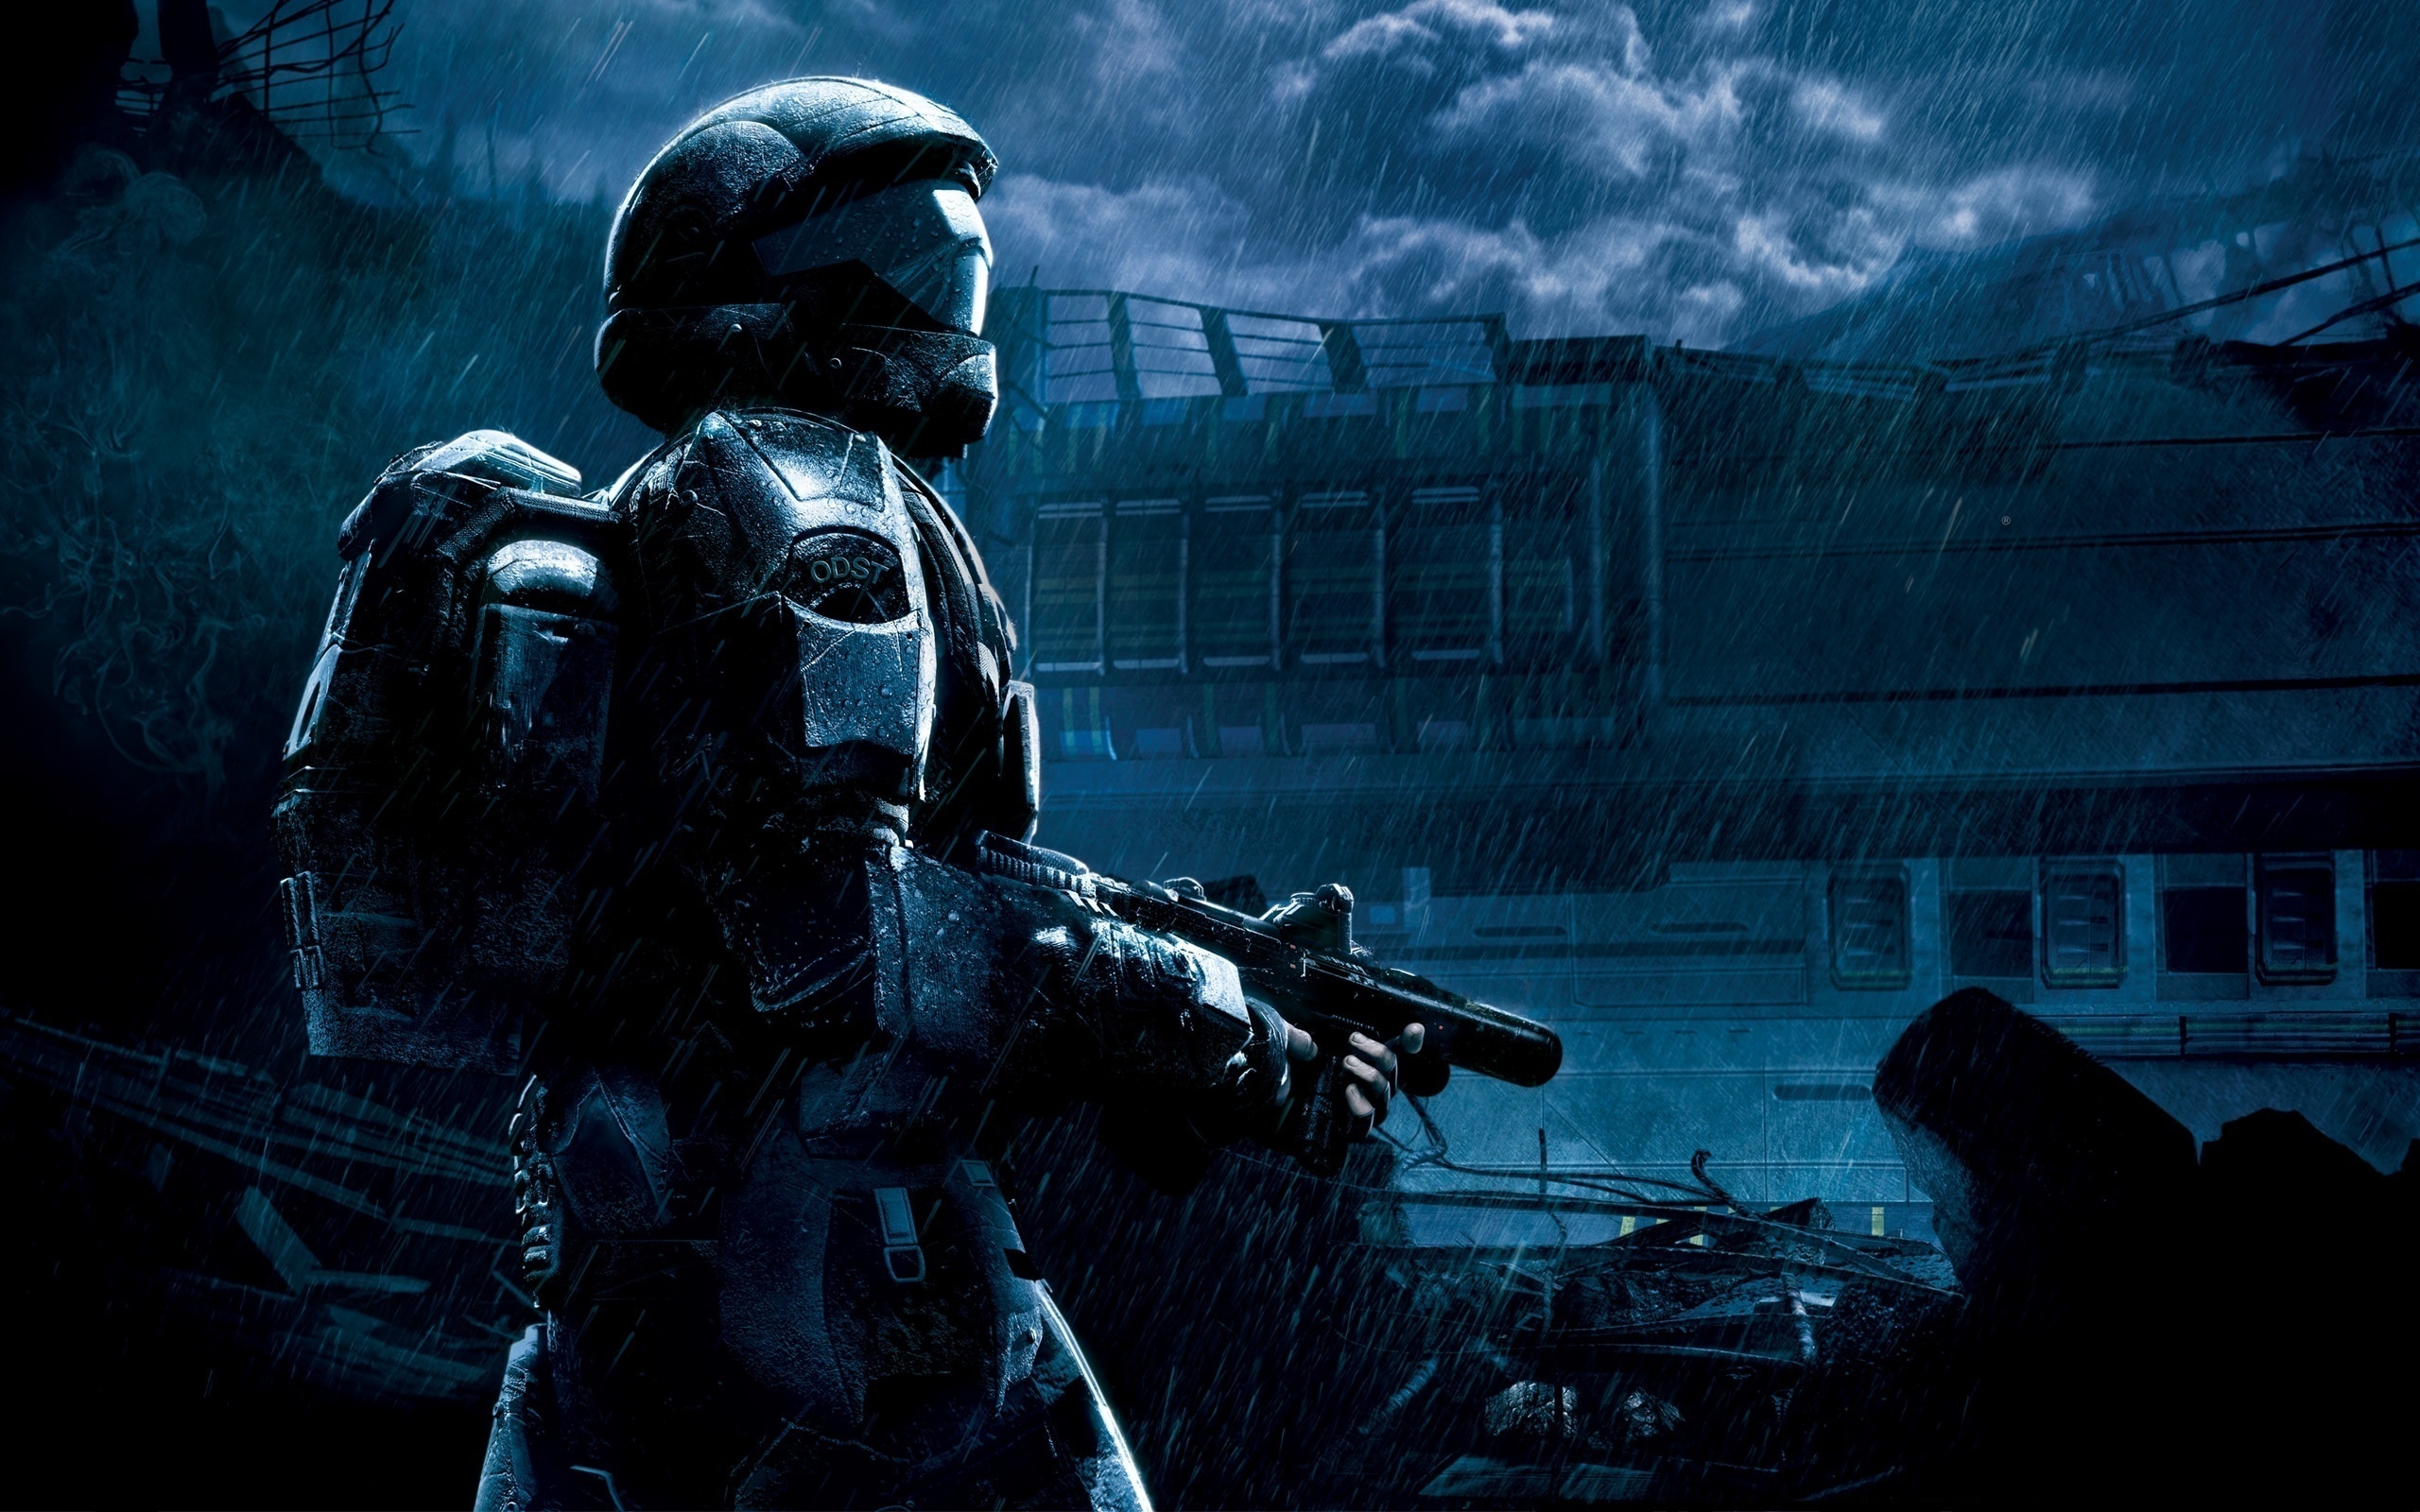 Video Game Halo 3: ODST HD Wallpaper